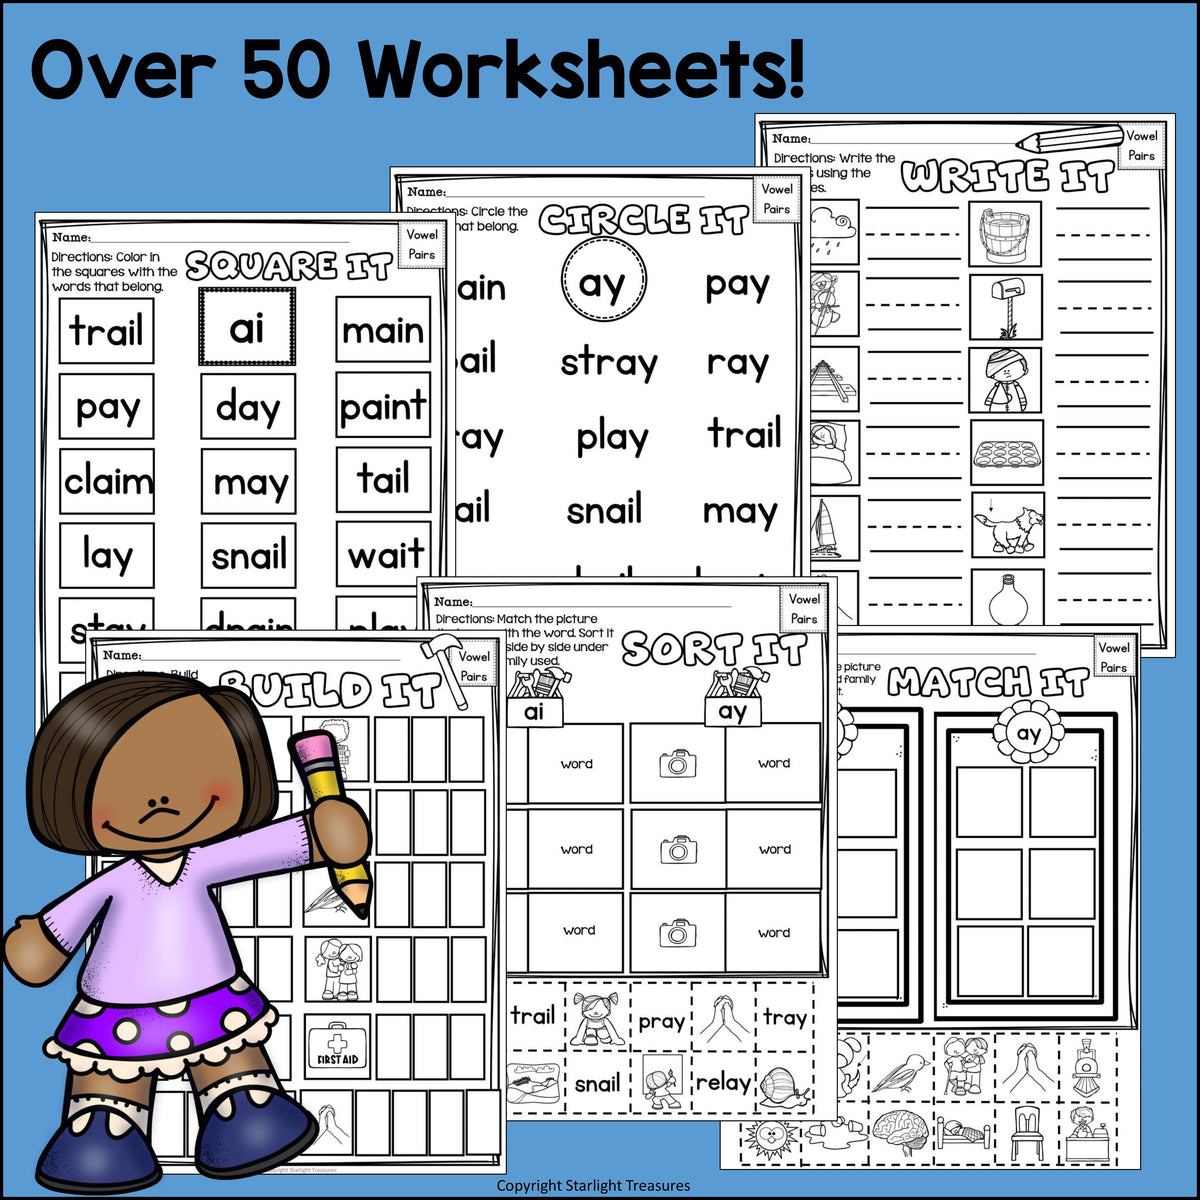 Vowel Pairs Ai Ay Worksheets And Activities For Early Readers Phoni